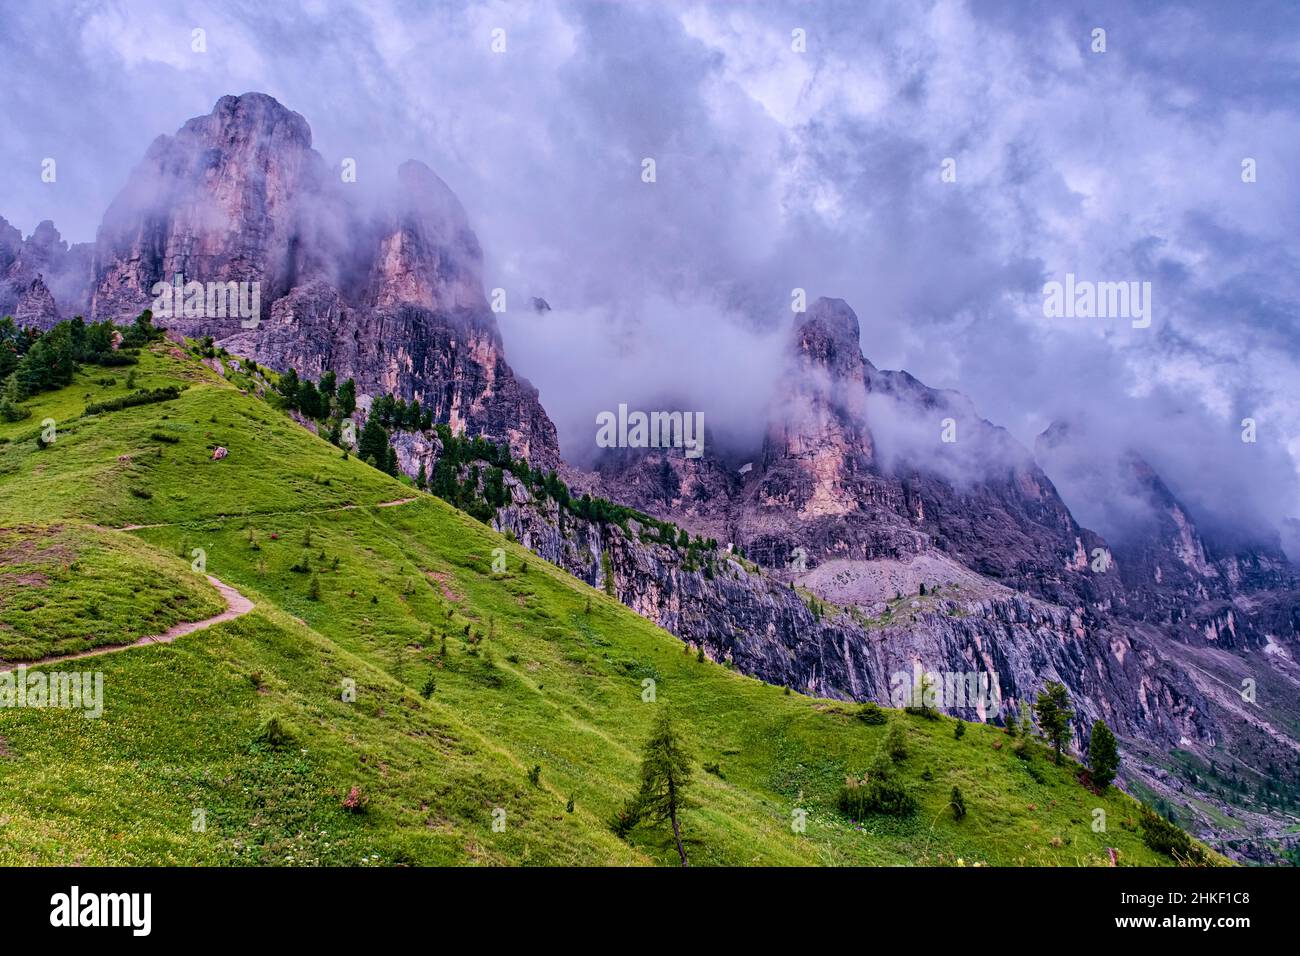 View of the Sella group with the summit of Sas dla Luesa left and Murfeit tower right, covered in dark thunderstorm clouds, seen from Gardena Pass. Stock Photo